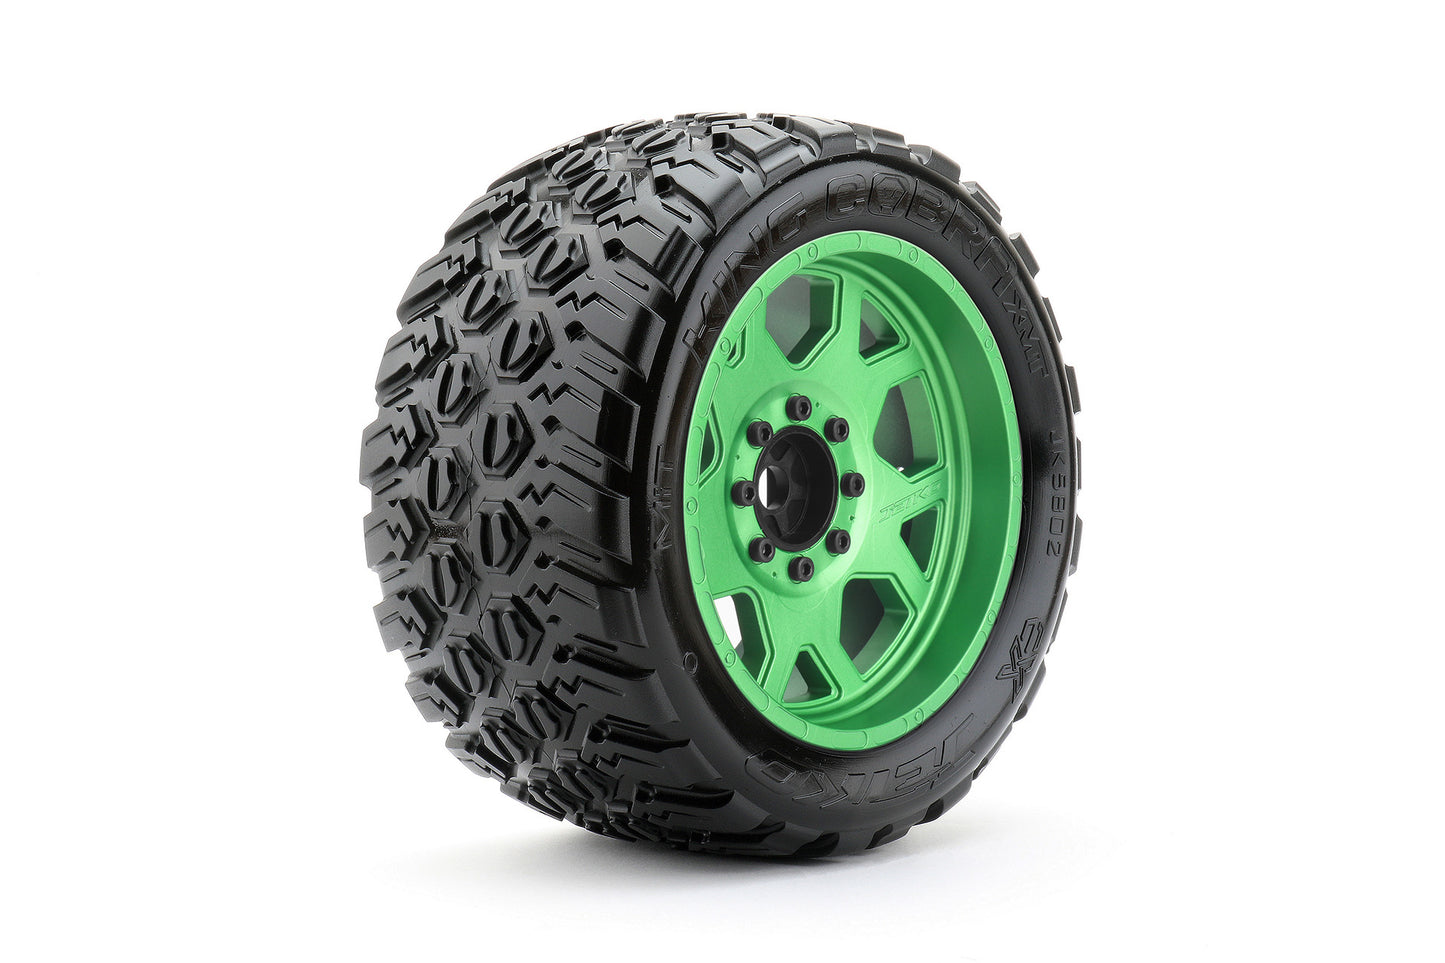 1/5 XMT EX-King Cobra Tires Mounted on Metal Claw Rims, Medium Soft, Glued, Belted, 24mm, for Traxxas X-Maxx